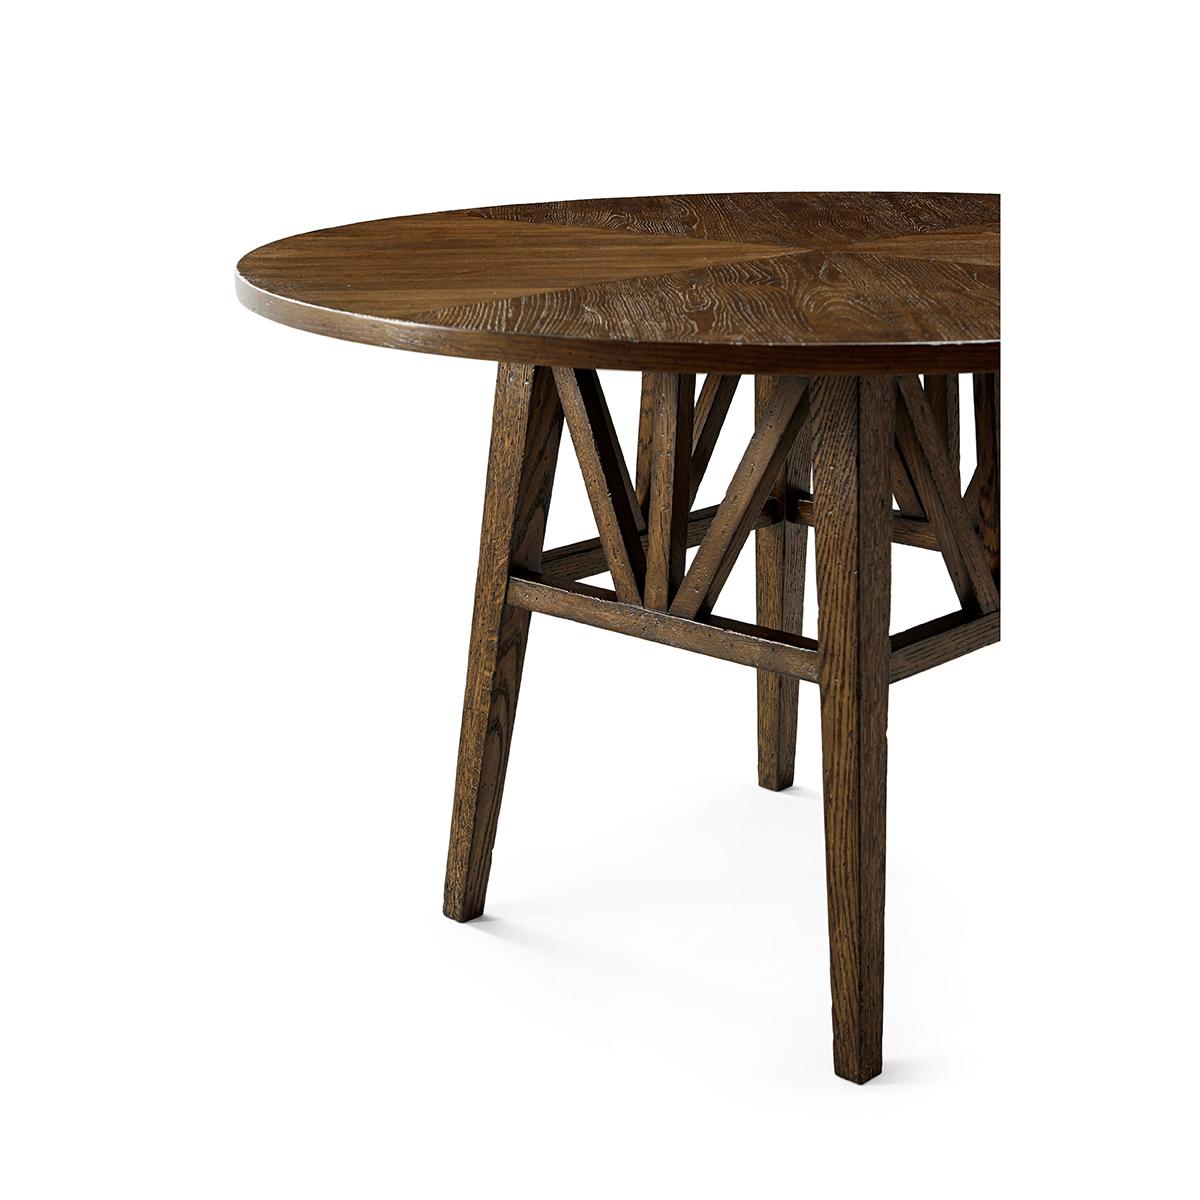 Wood Dark Rustic Oak Round Dining Table For Sale